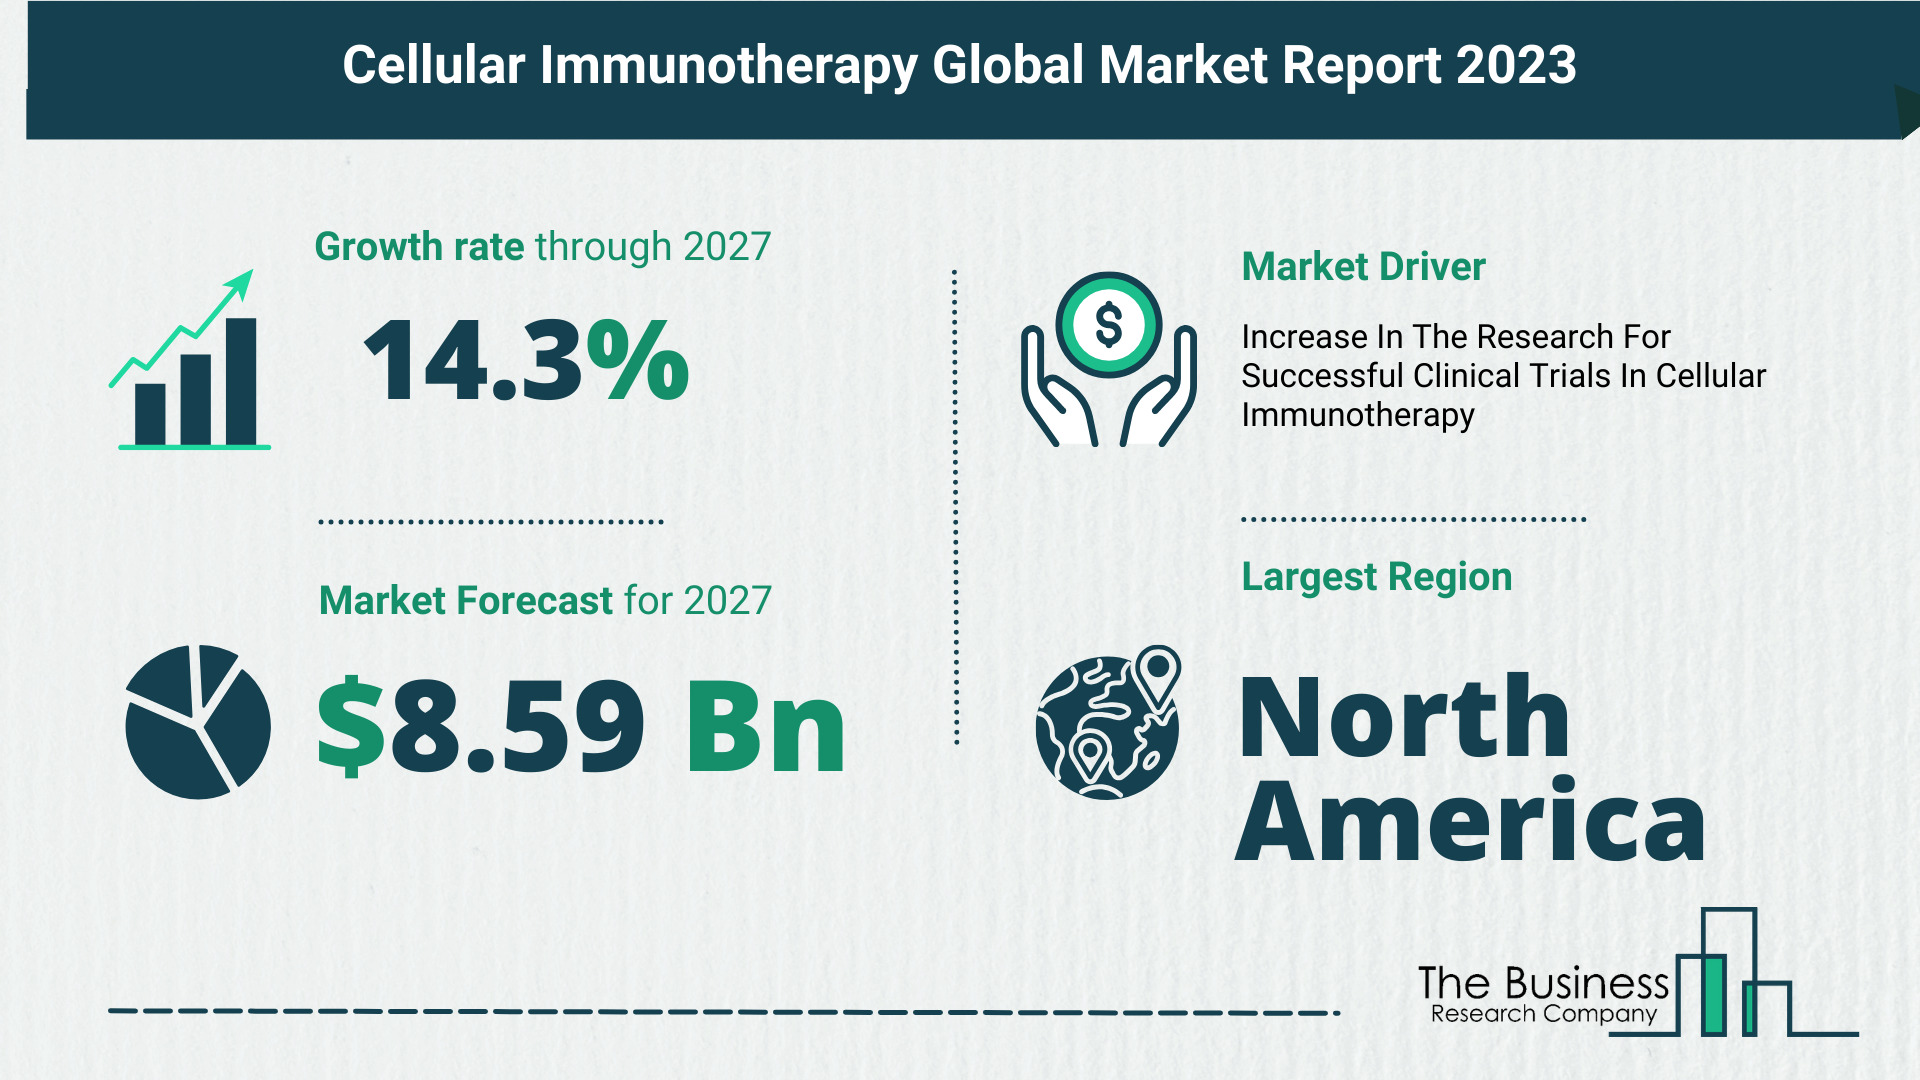 Top 5 Insights From The Cellular Immunotherapy Market Report 2023